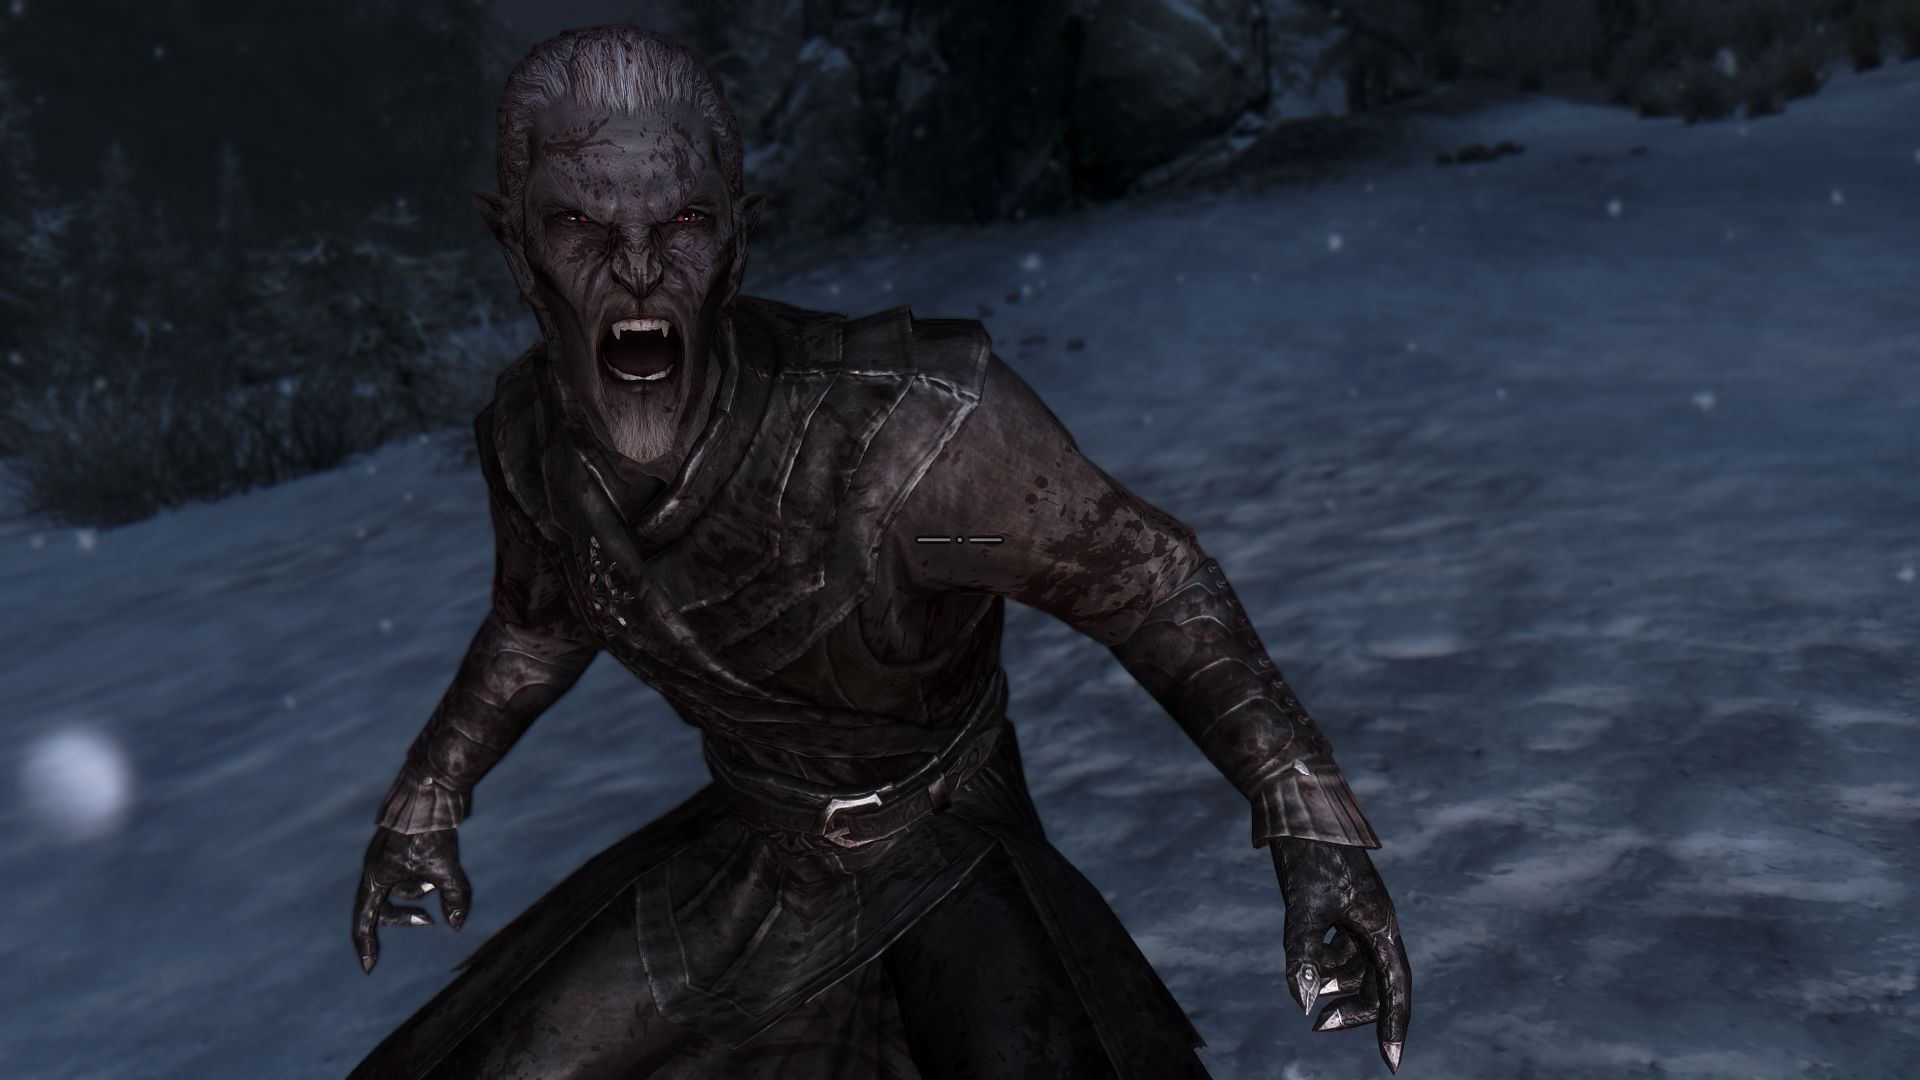 How to cure vampirism in Skyrim?